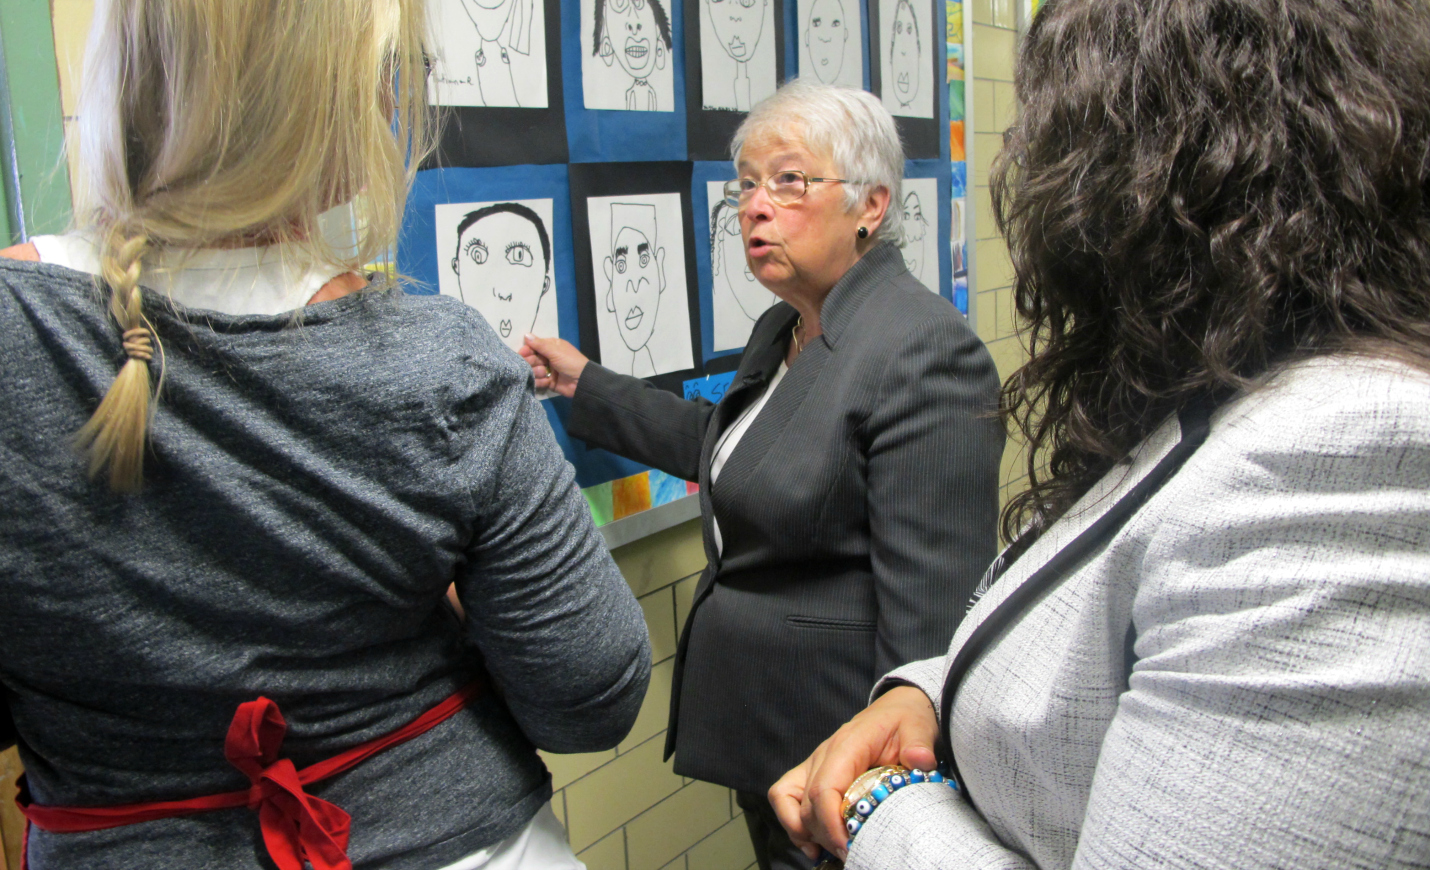 Chancellor Carmen Fariña on one of her hundreds of school visits.